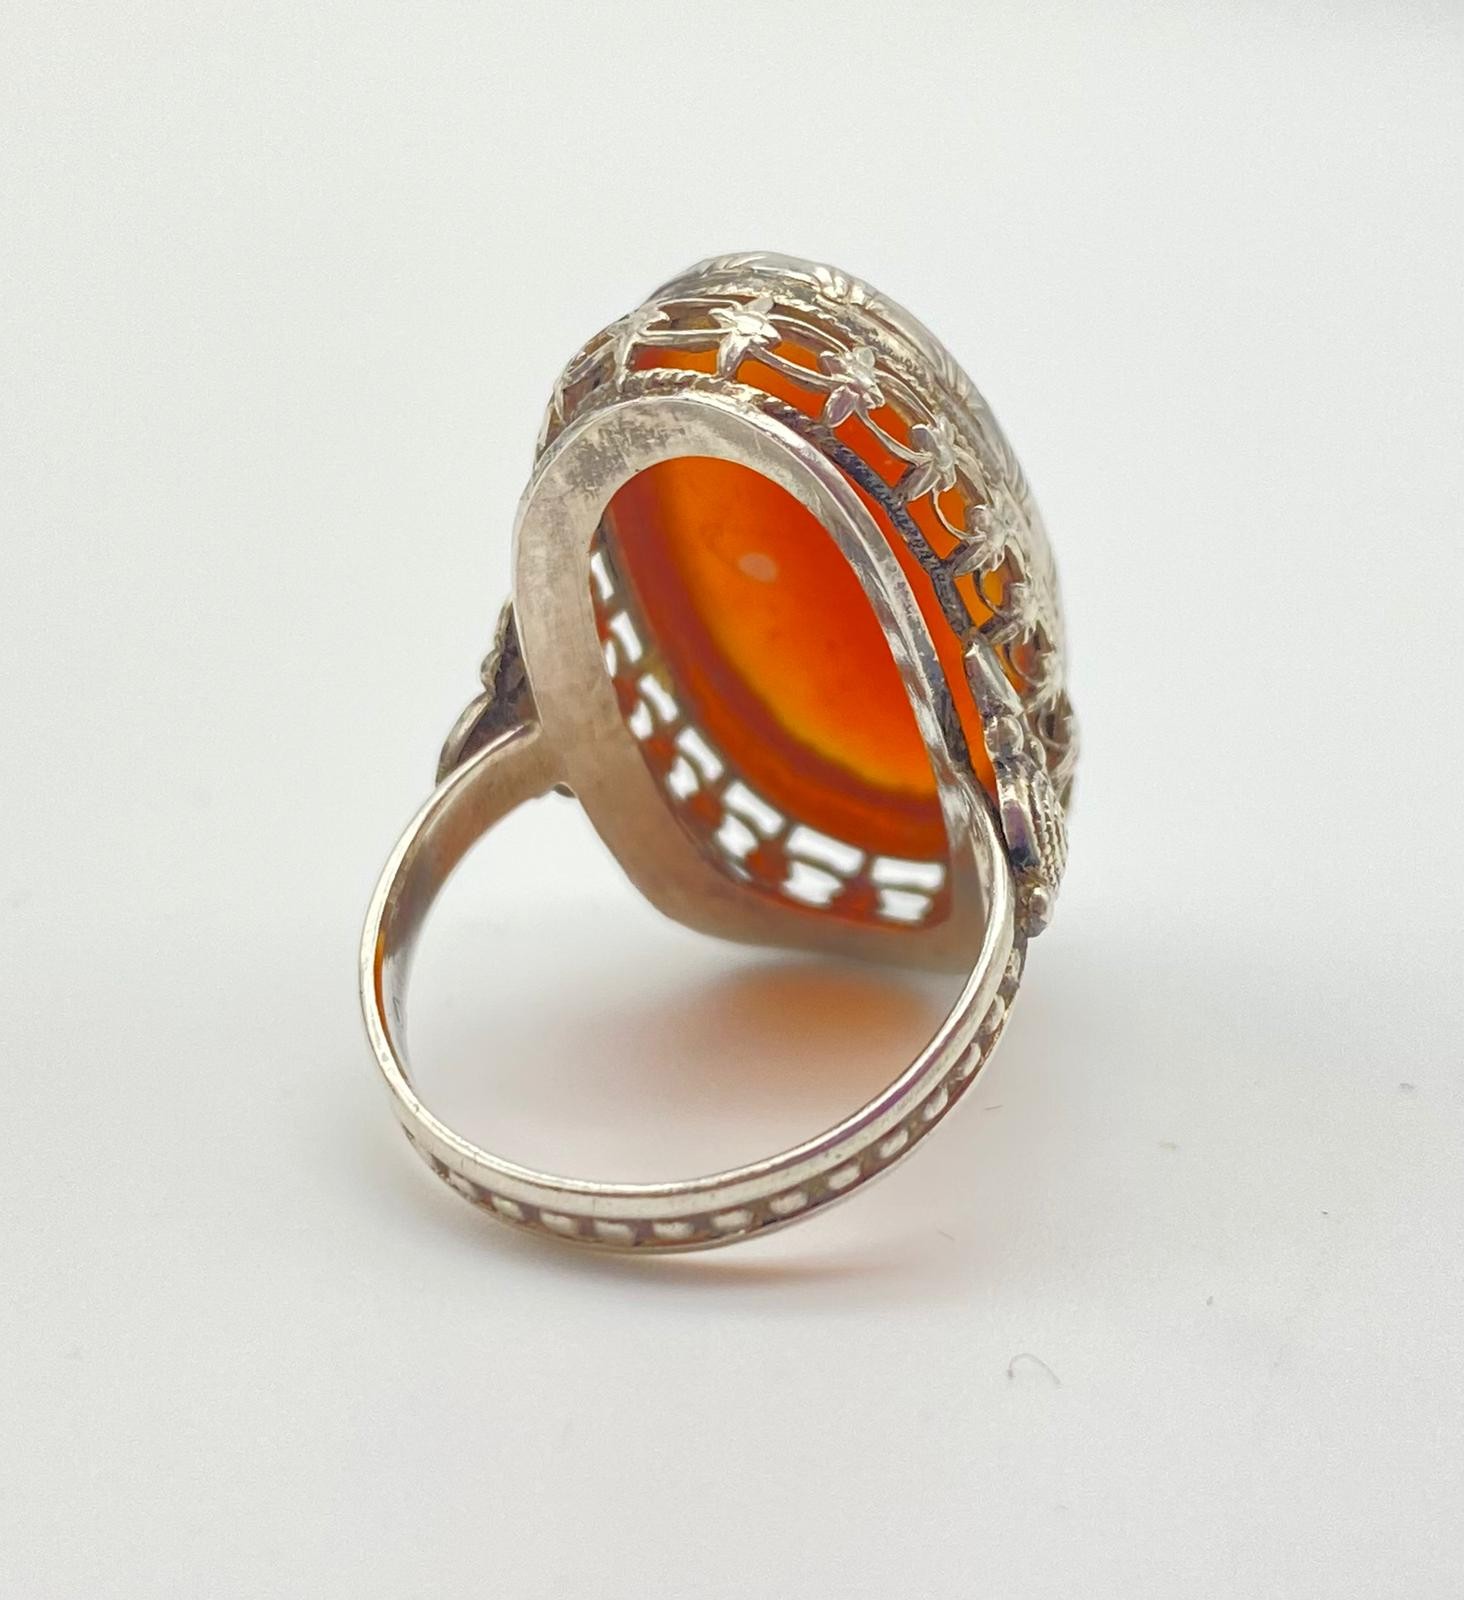 Large Vintage Citrine Stone Silver Ring. Size O. 5.67g - Image 4 of 4